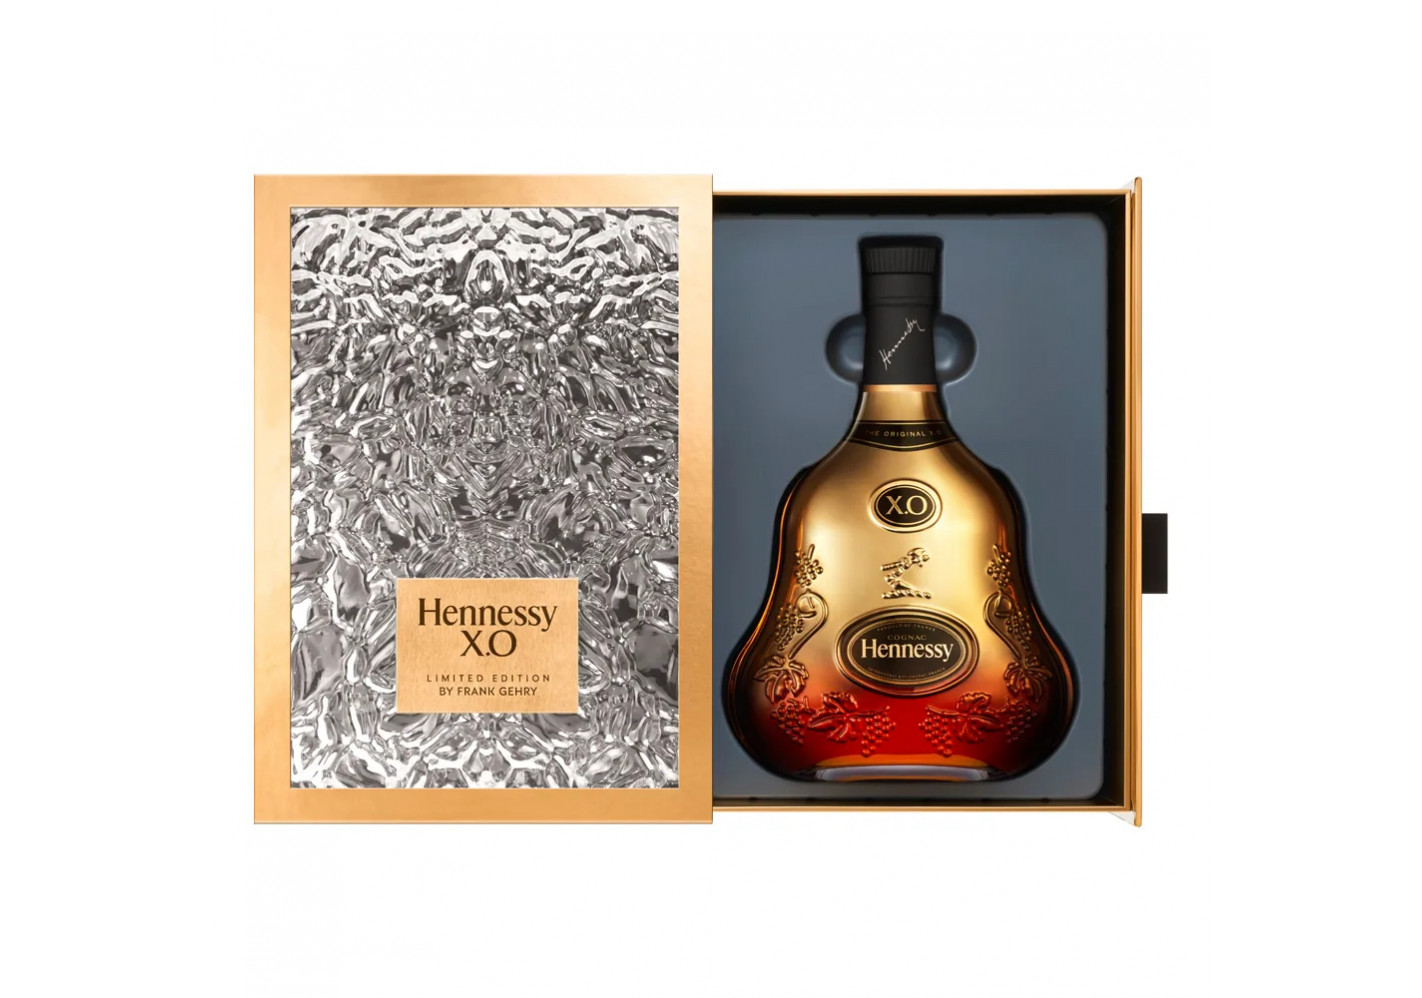 Hennessy XO 150th Anniversary Limited Edition by Frank Gehry 